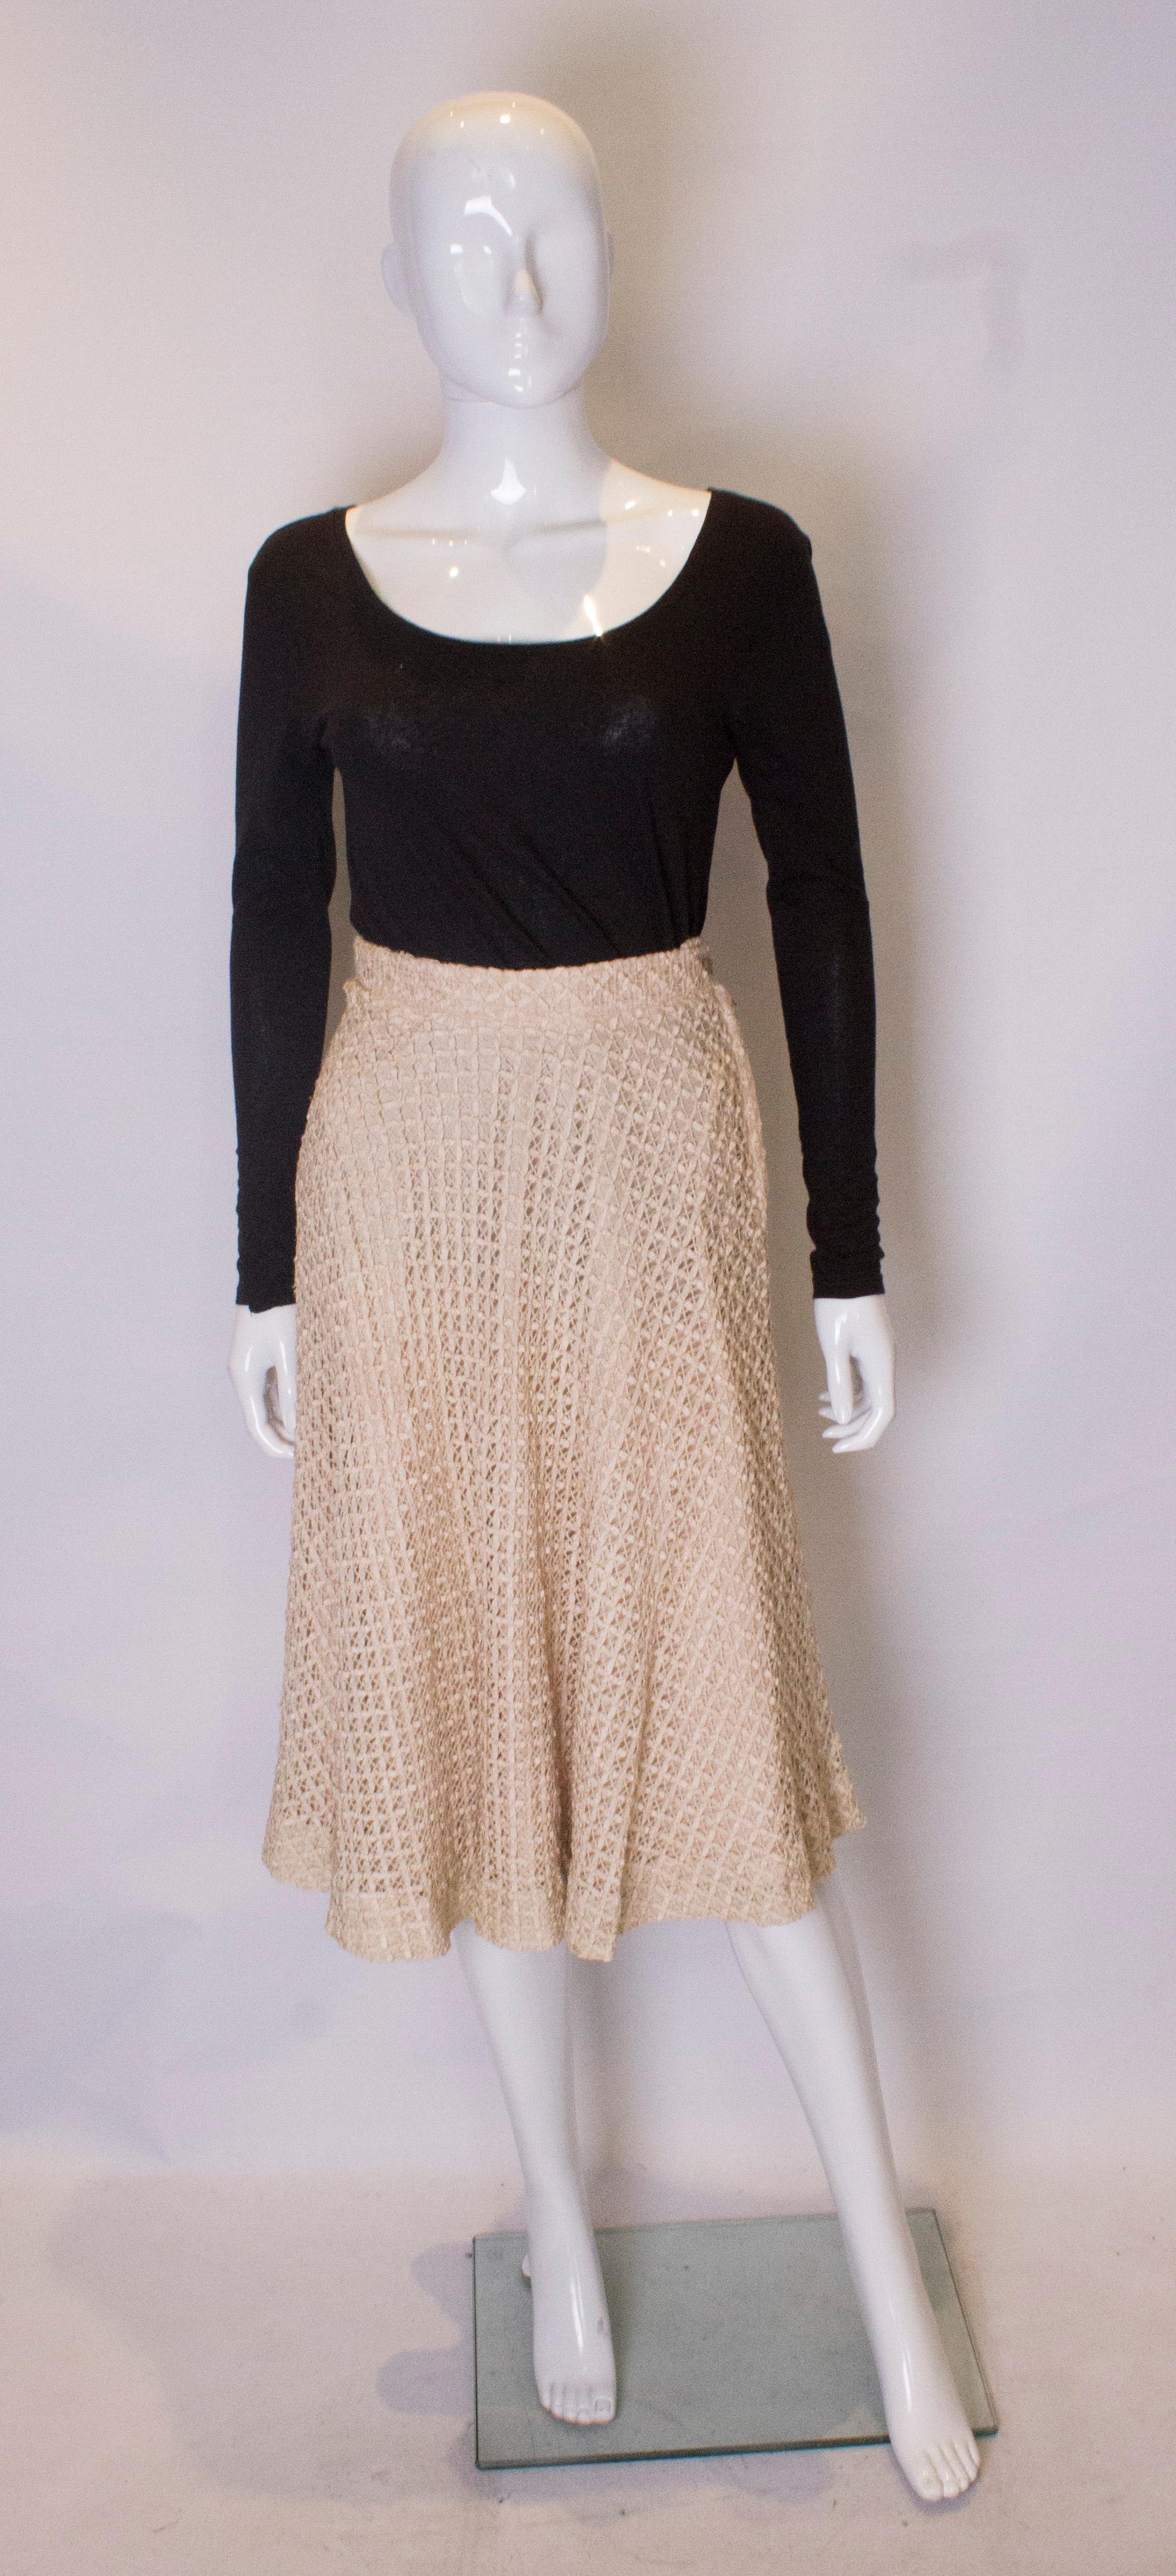 A vintage 1950s cream ribbon woven swing skirt 

Sits on the waist and fastens with zip and a button

measurements taken flat in inches  

waist 12.5
length - 29

